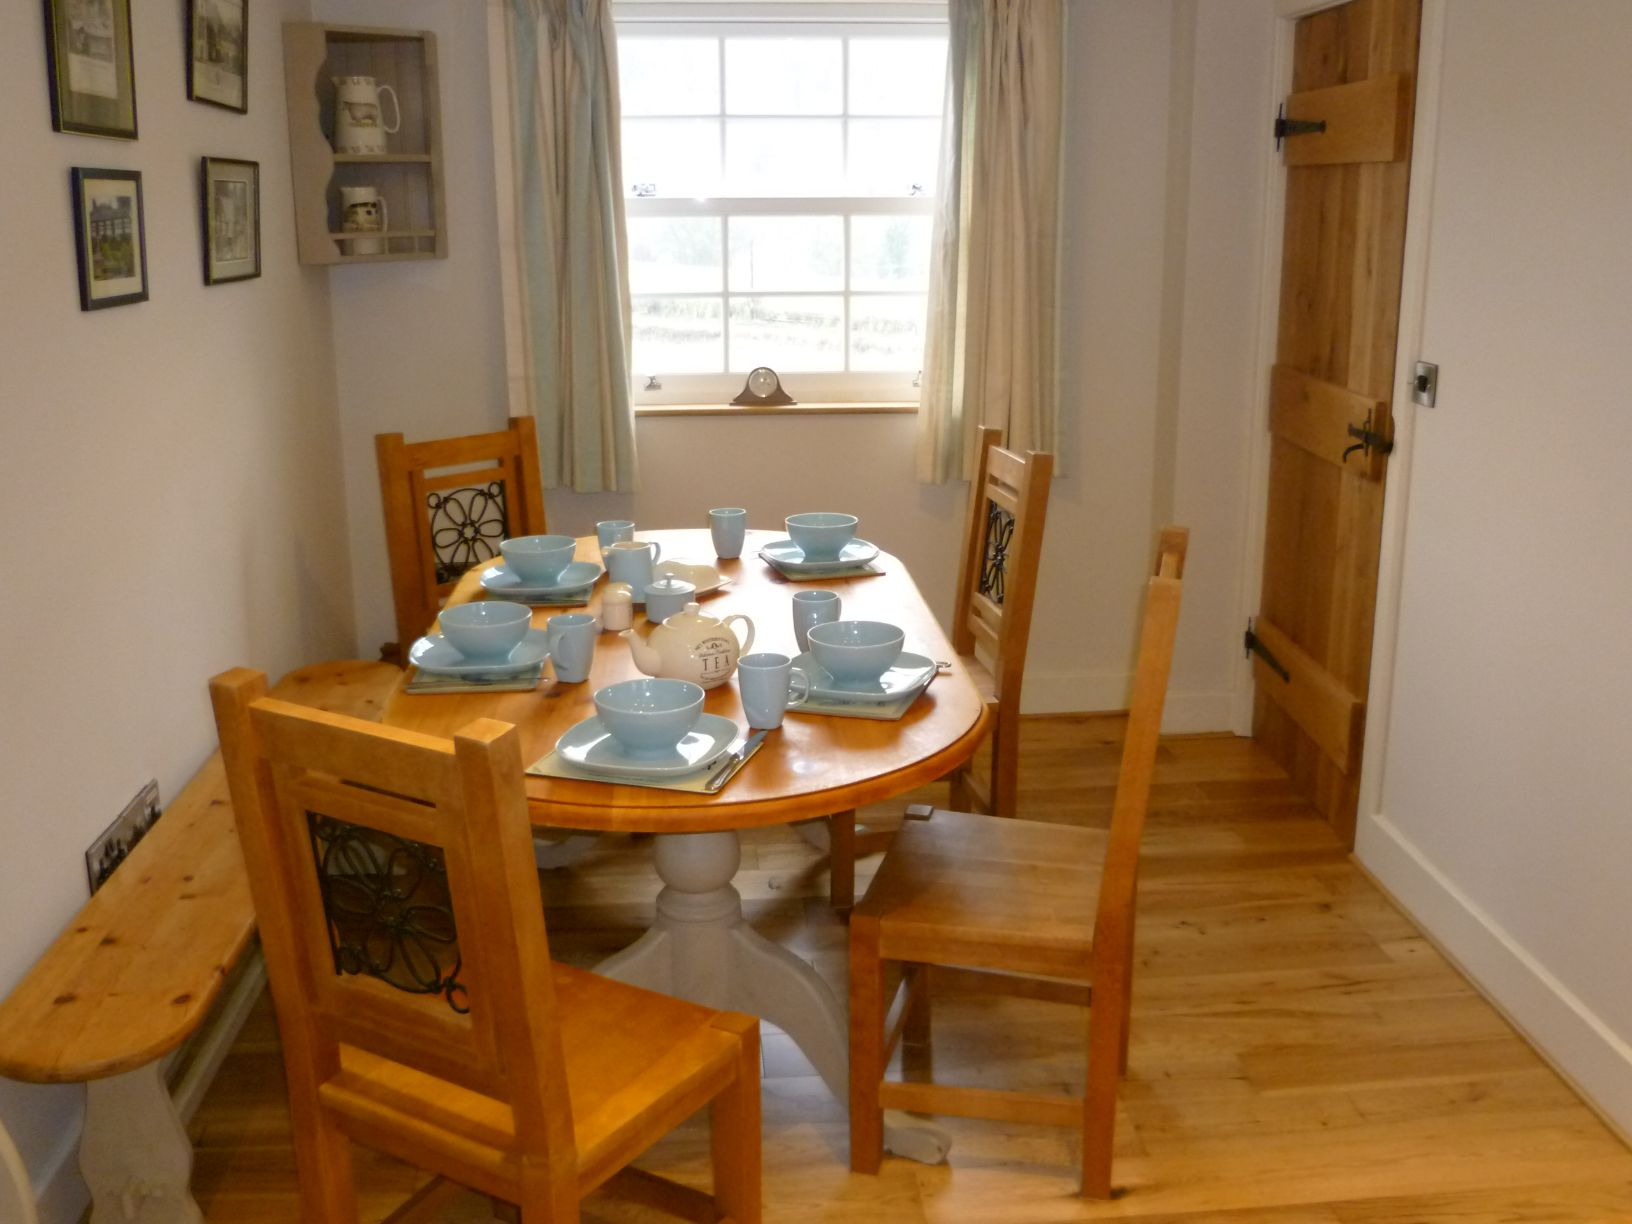 The dining table with chairs and a bench for up to 8 guests